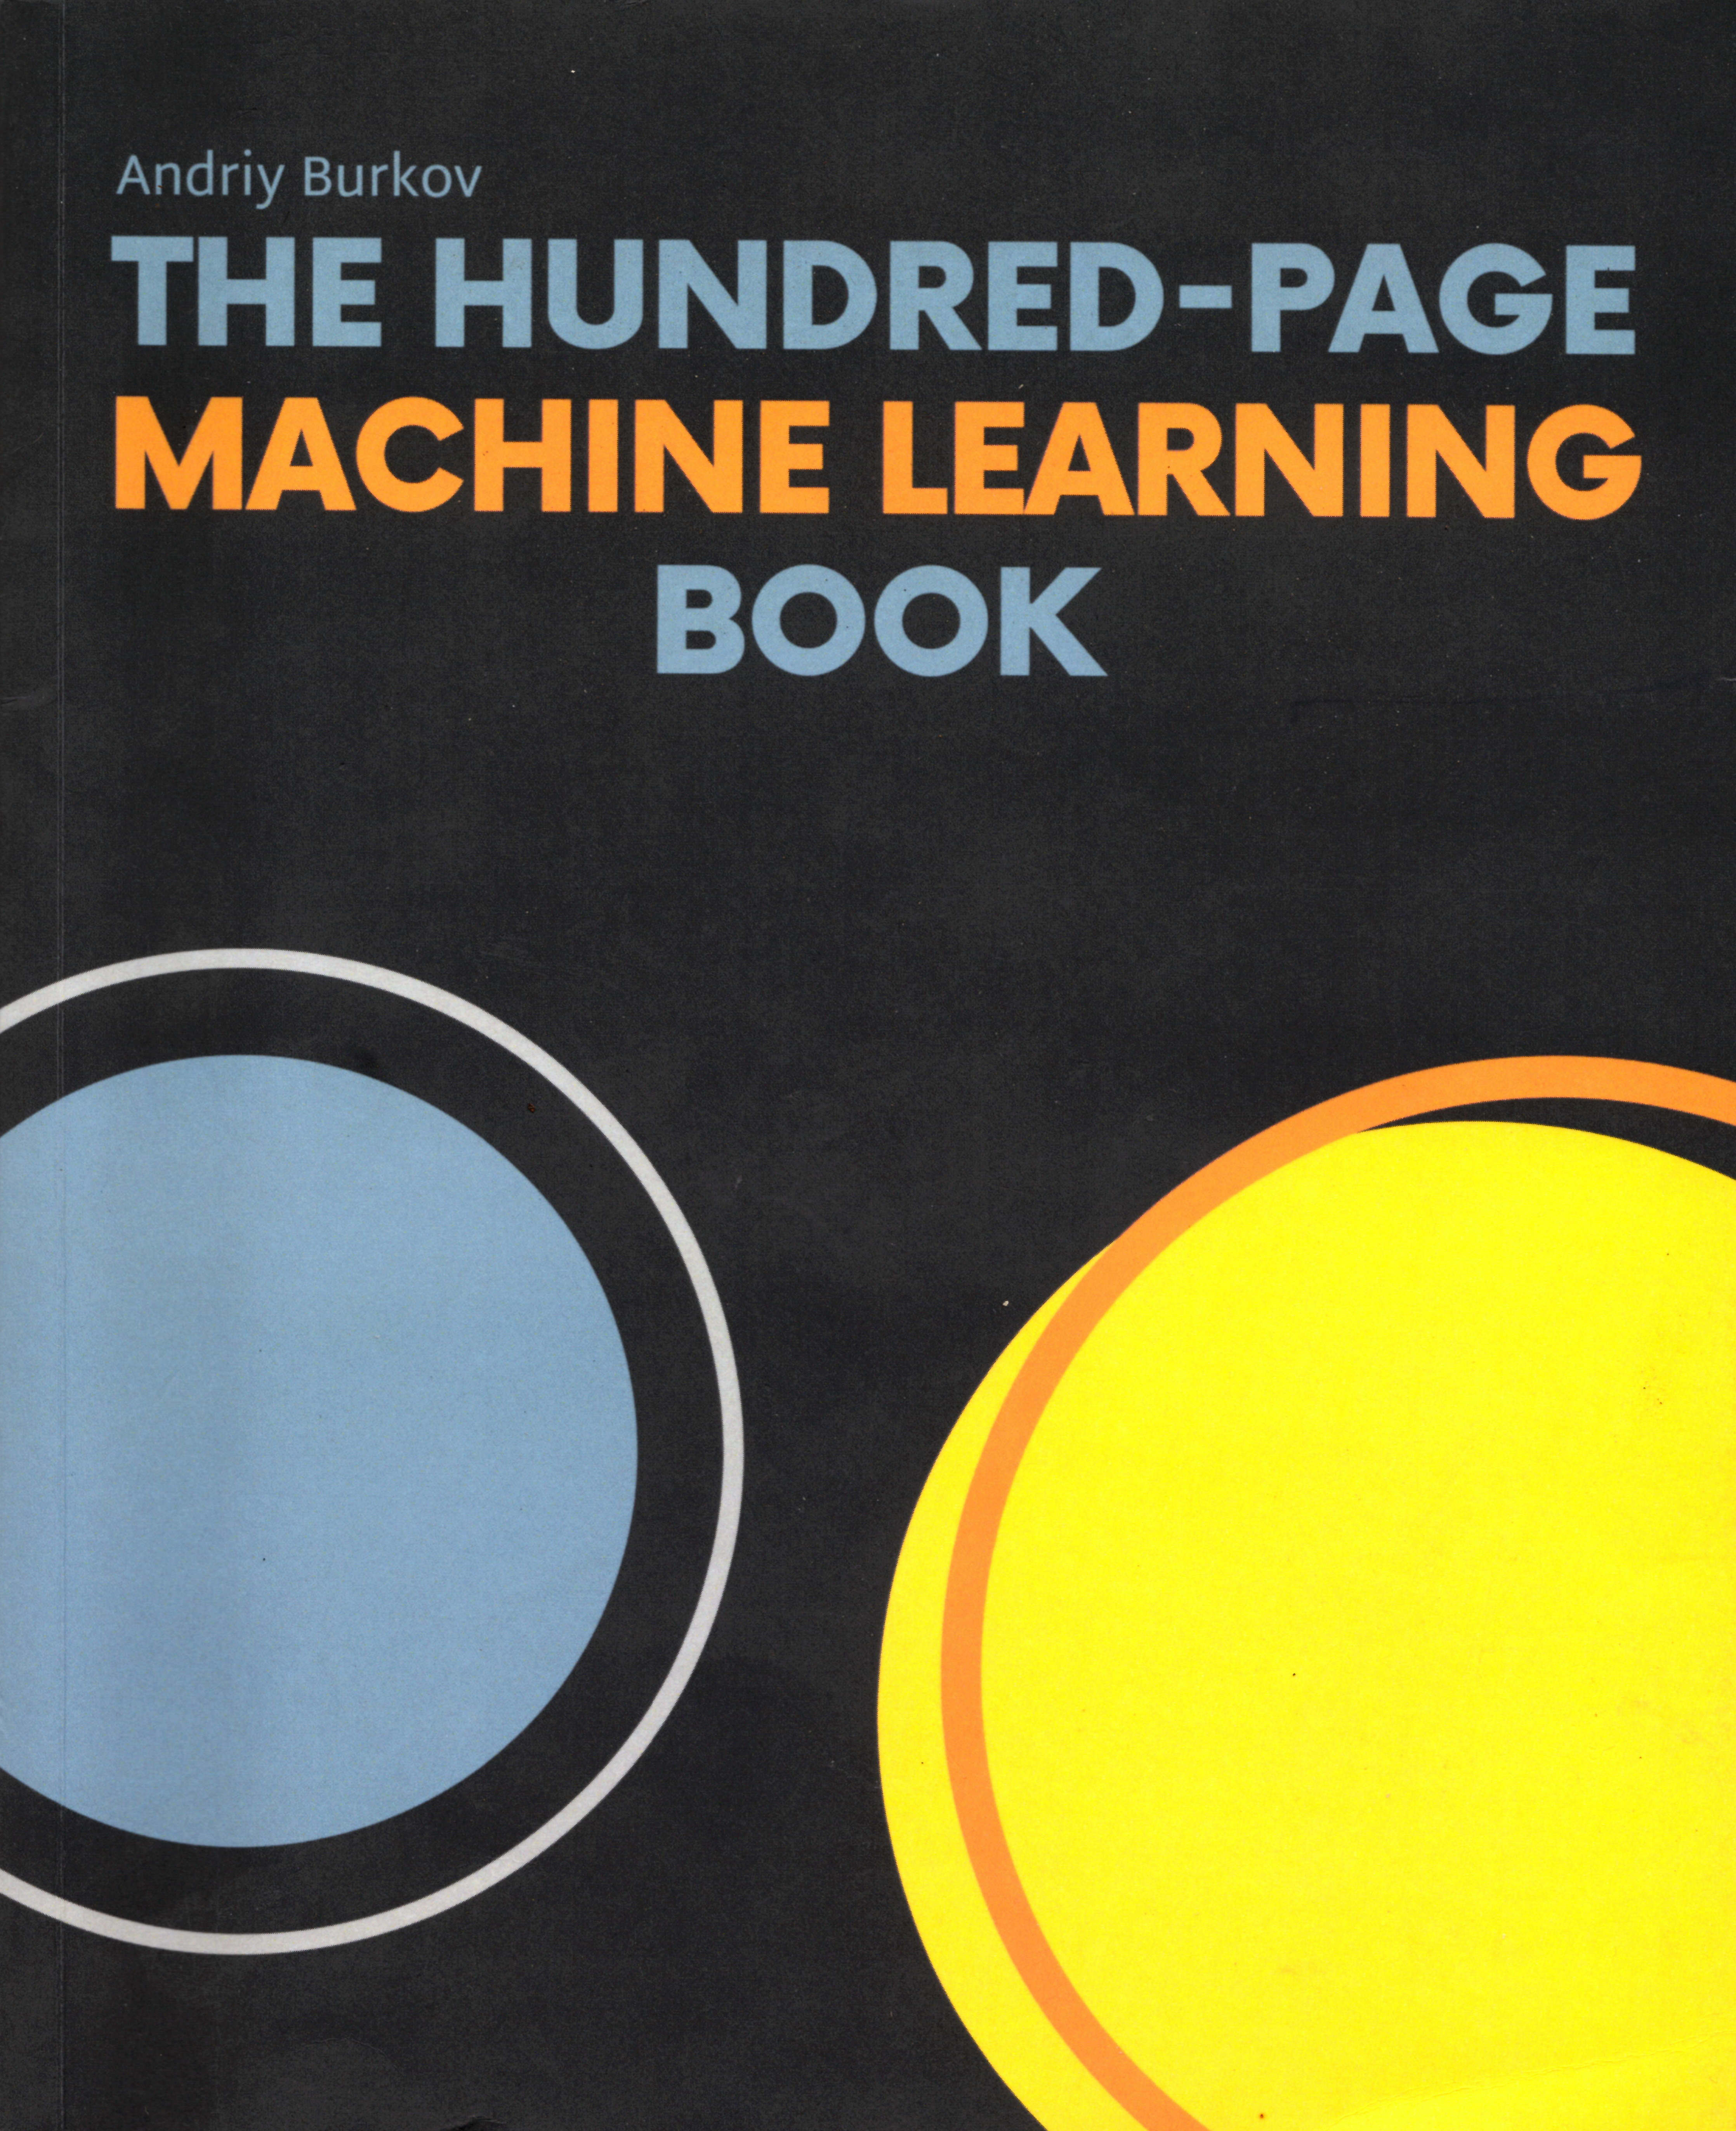 'The Hundred-Page Machine Learning Book' by Andriy Burkov